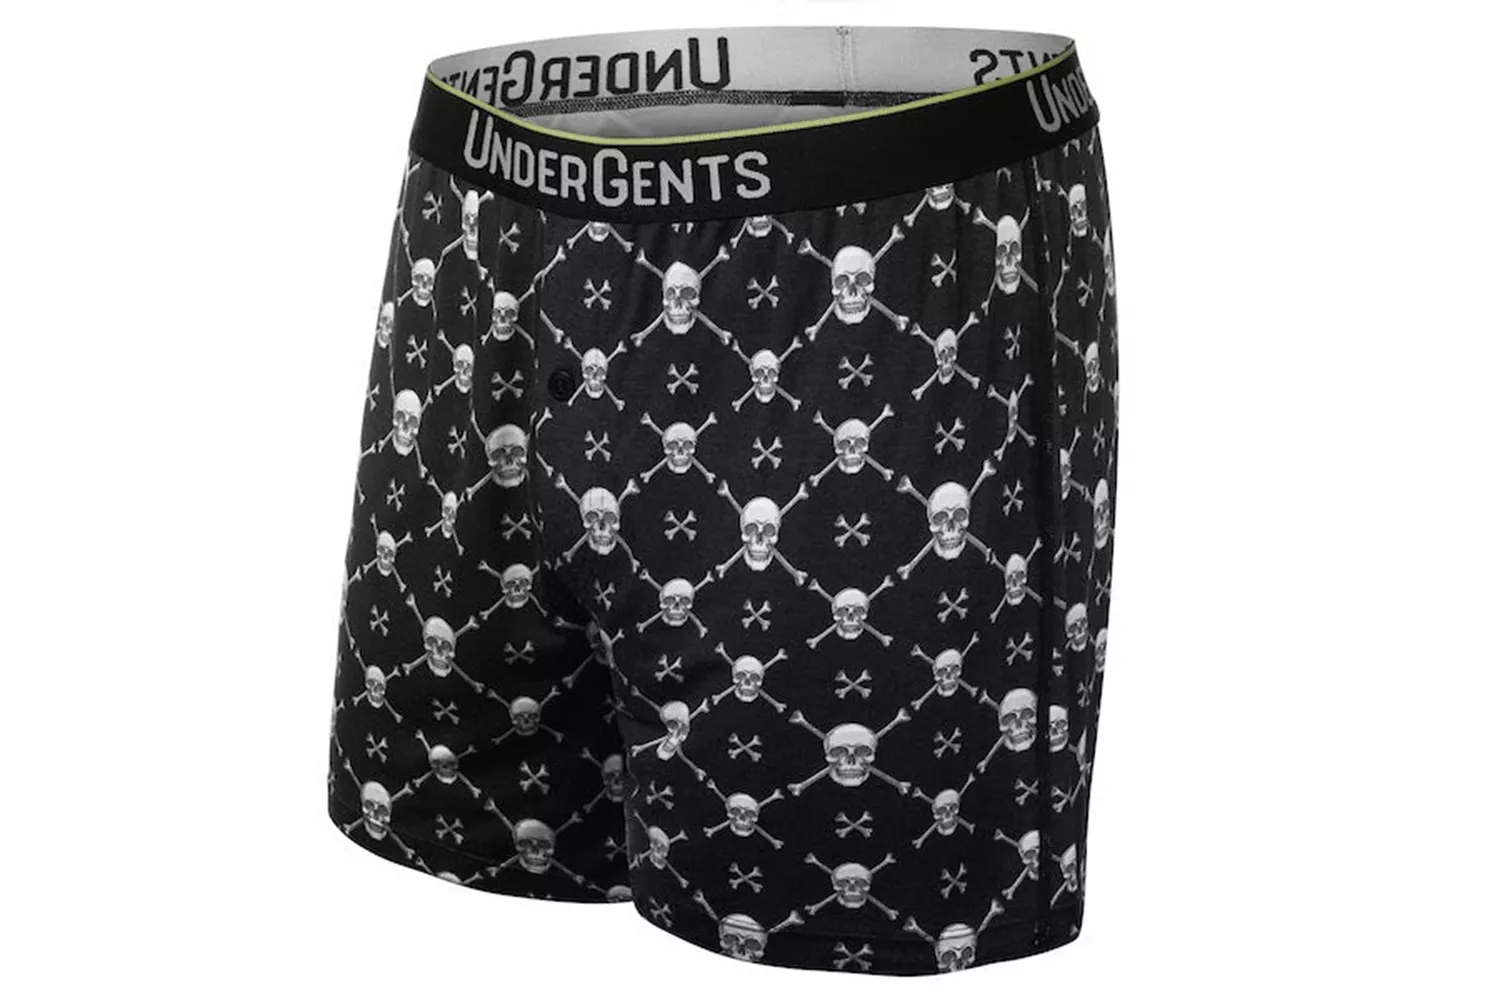 UnderGents Ultimate Men's Boxer Short: Ultra-Soft Pure Comfort and Freedom